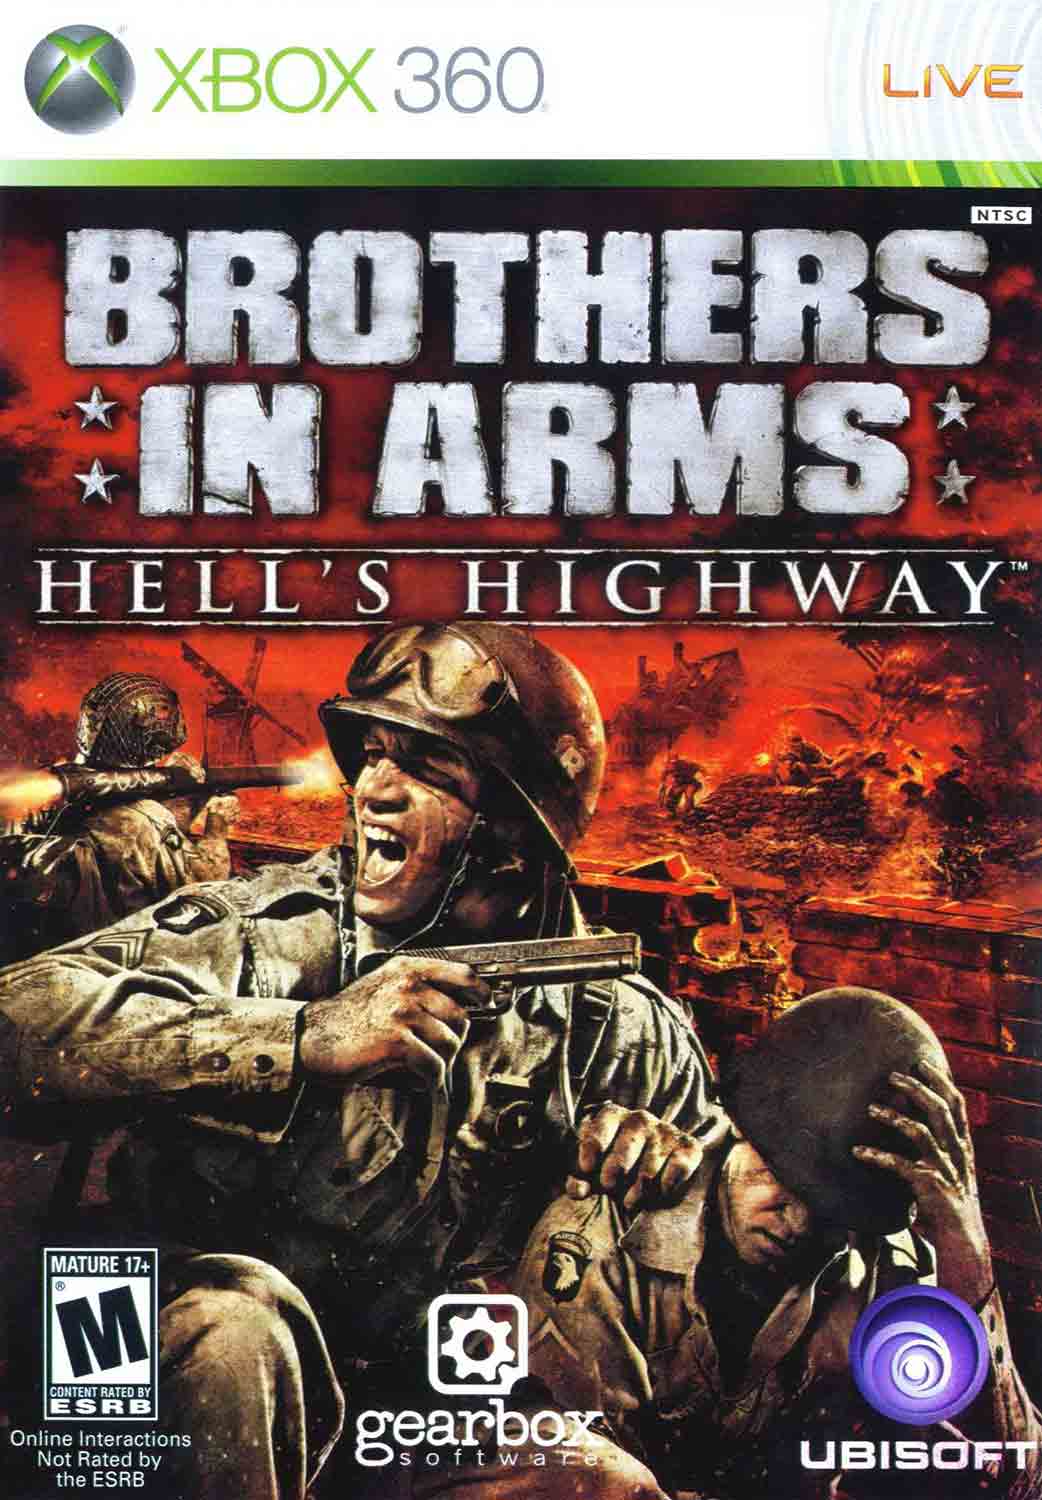 Hra Brothers In Arms: Hell's Highway pro XBOX 360 X360 konzole